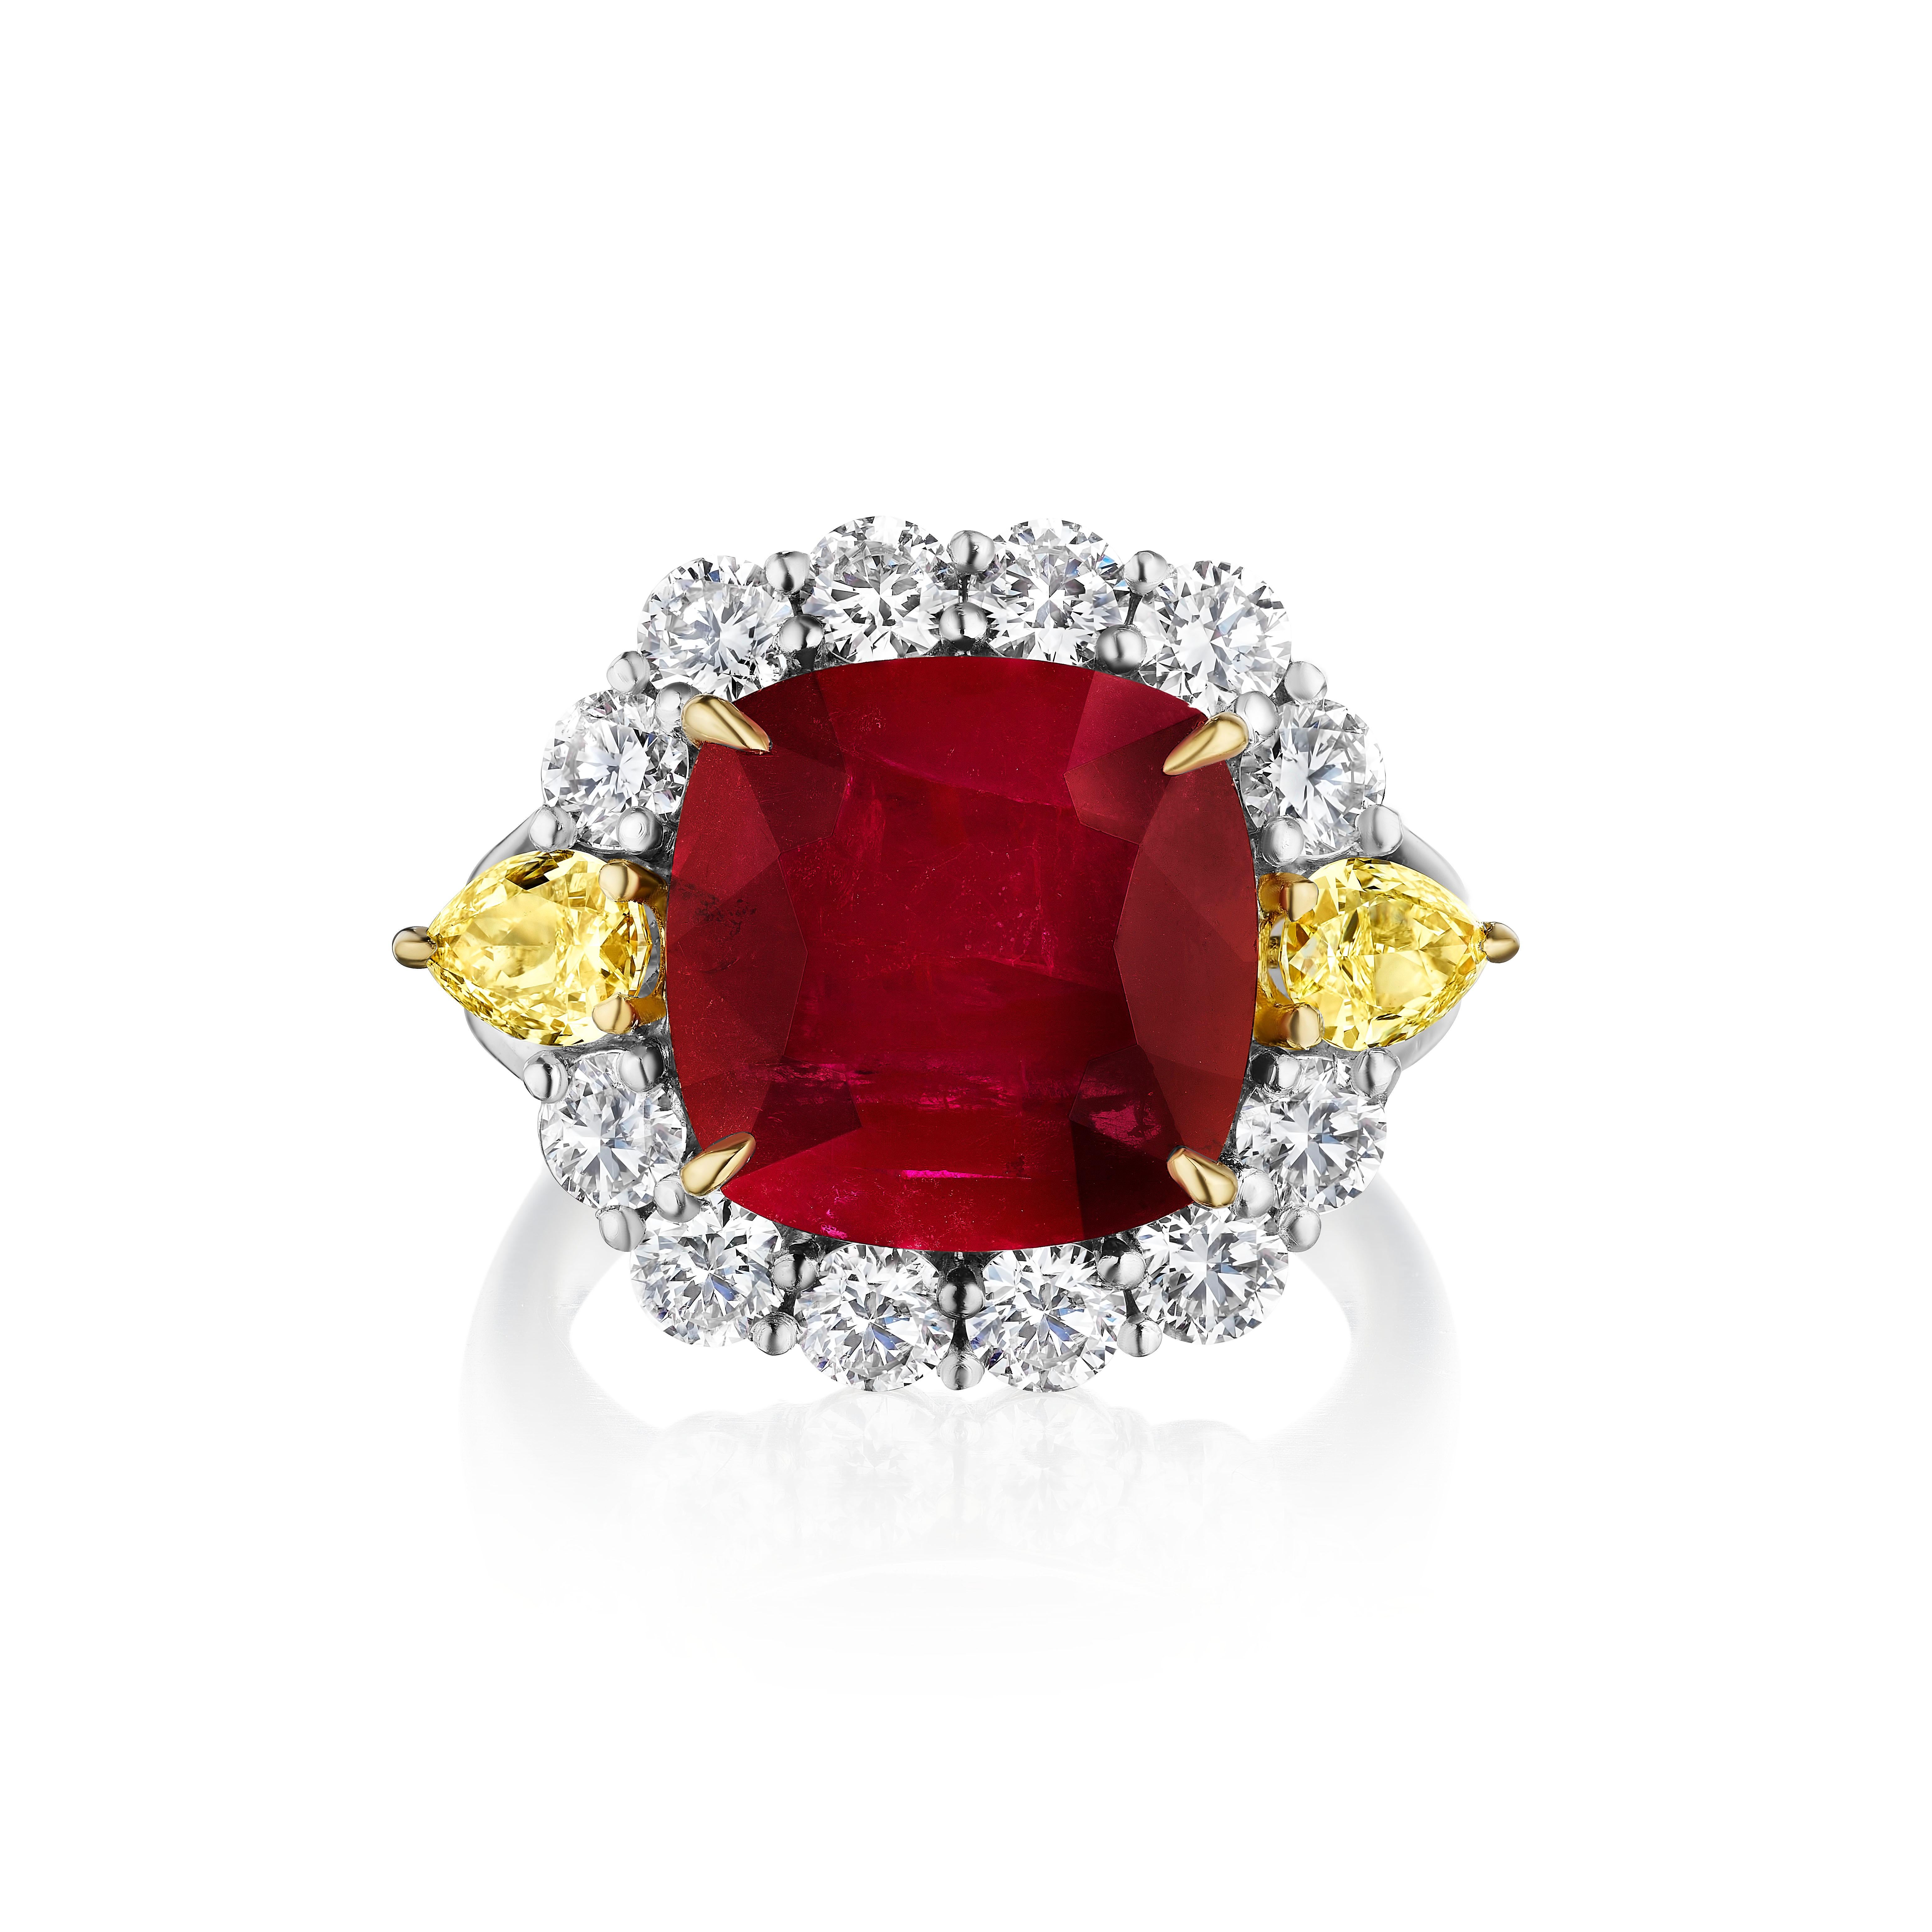 Cushion Cut Auction - AGL Certified 7.32 Carat Ruby and Diamond Ring For Sale